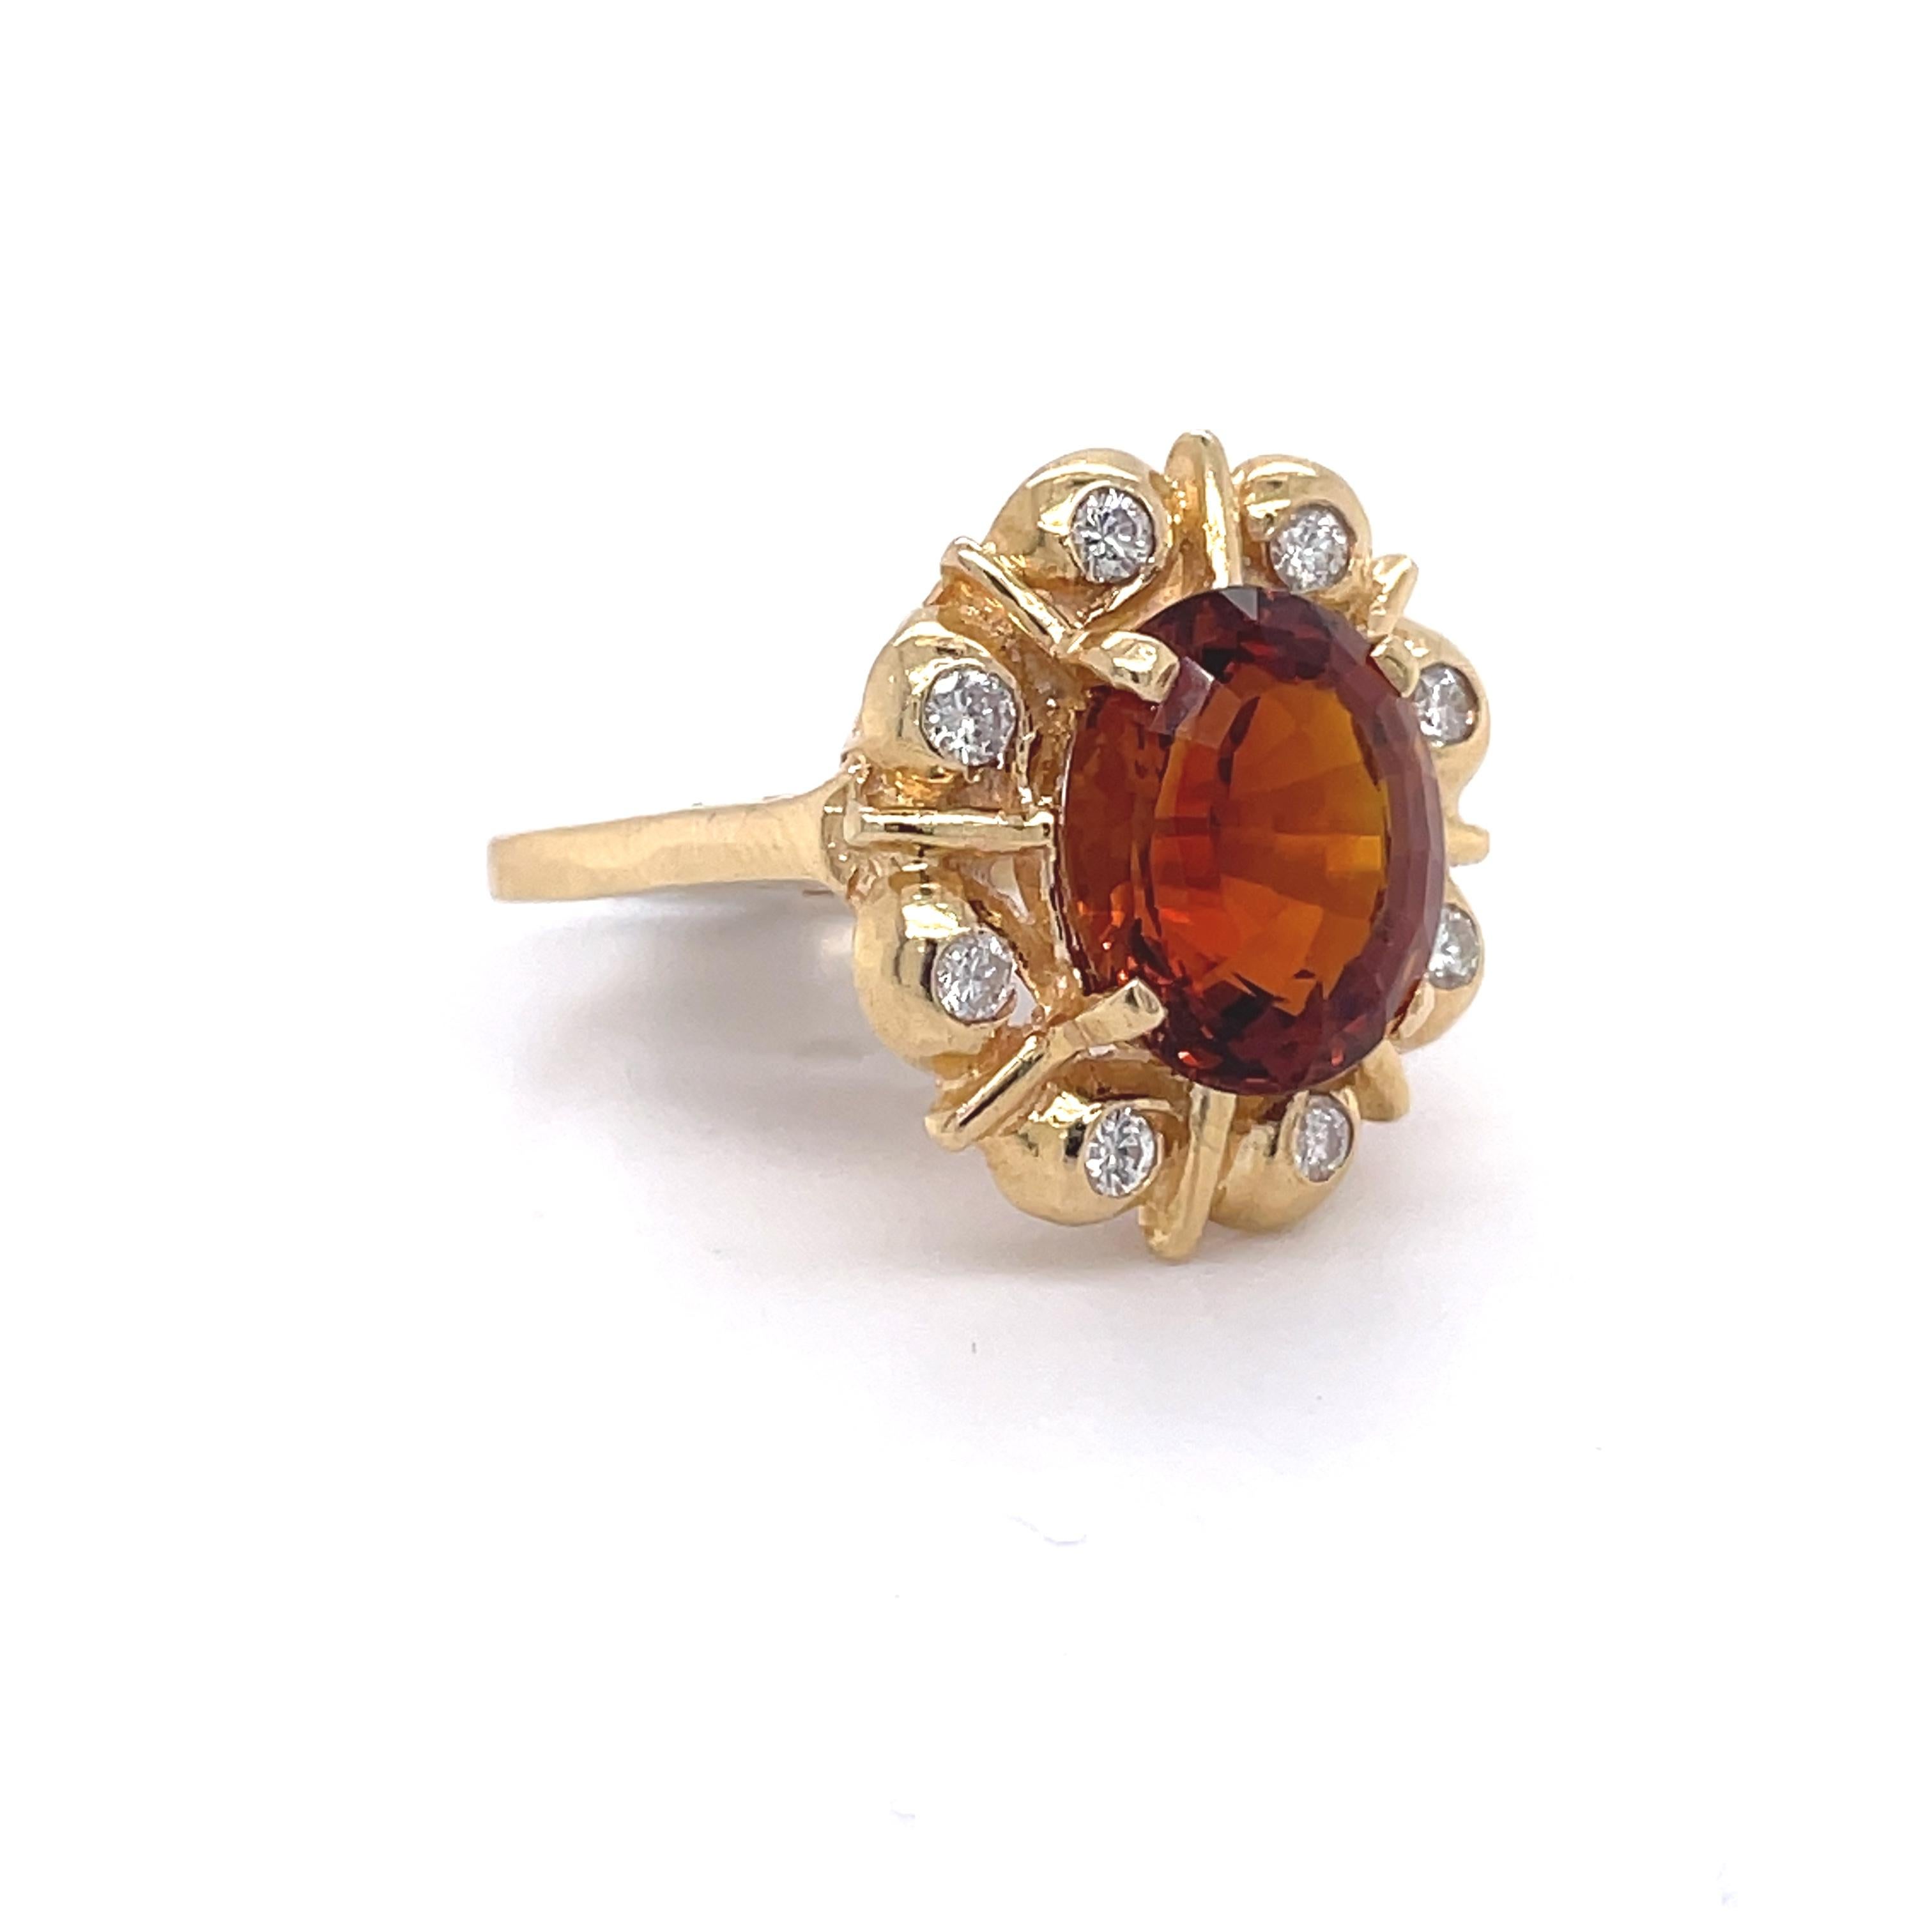 Topaz and Diamond Vintage Ring 5 Ct Oval Topaz, 10k Yellow Gold, Cocktail Ring In Excellent Condition For Sale In Ramat Gan, IL